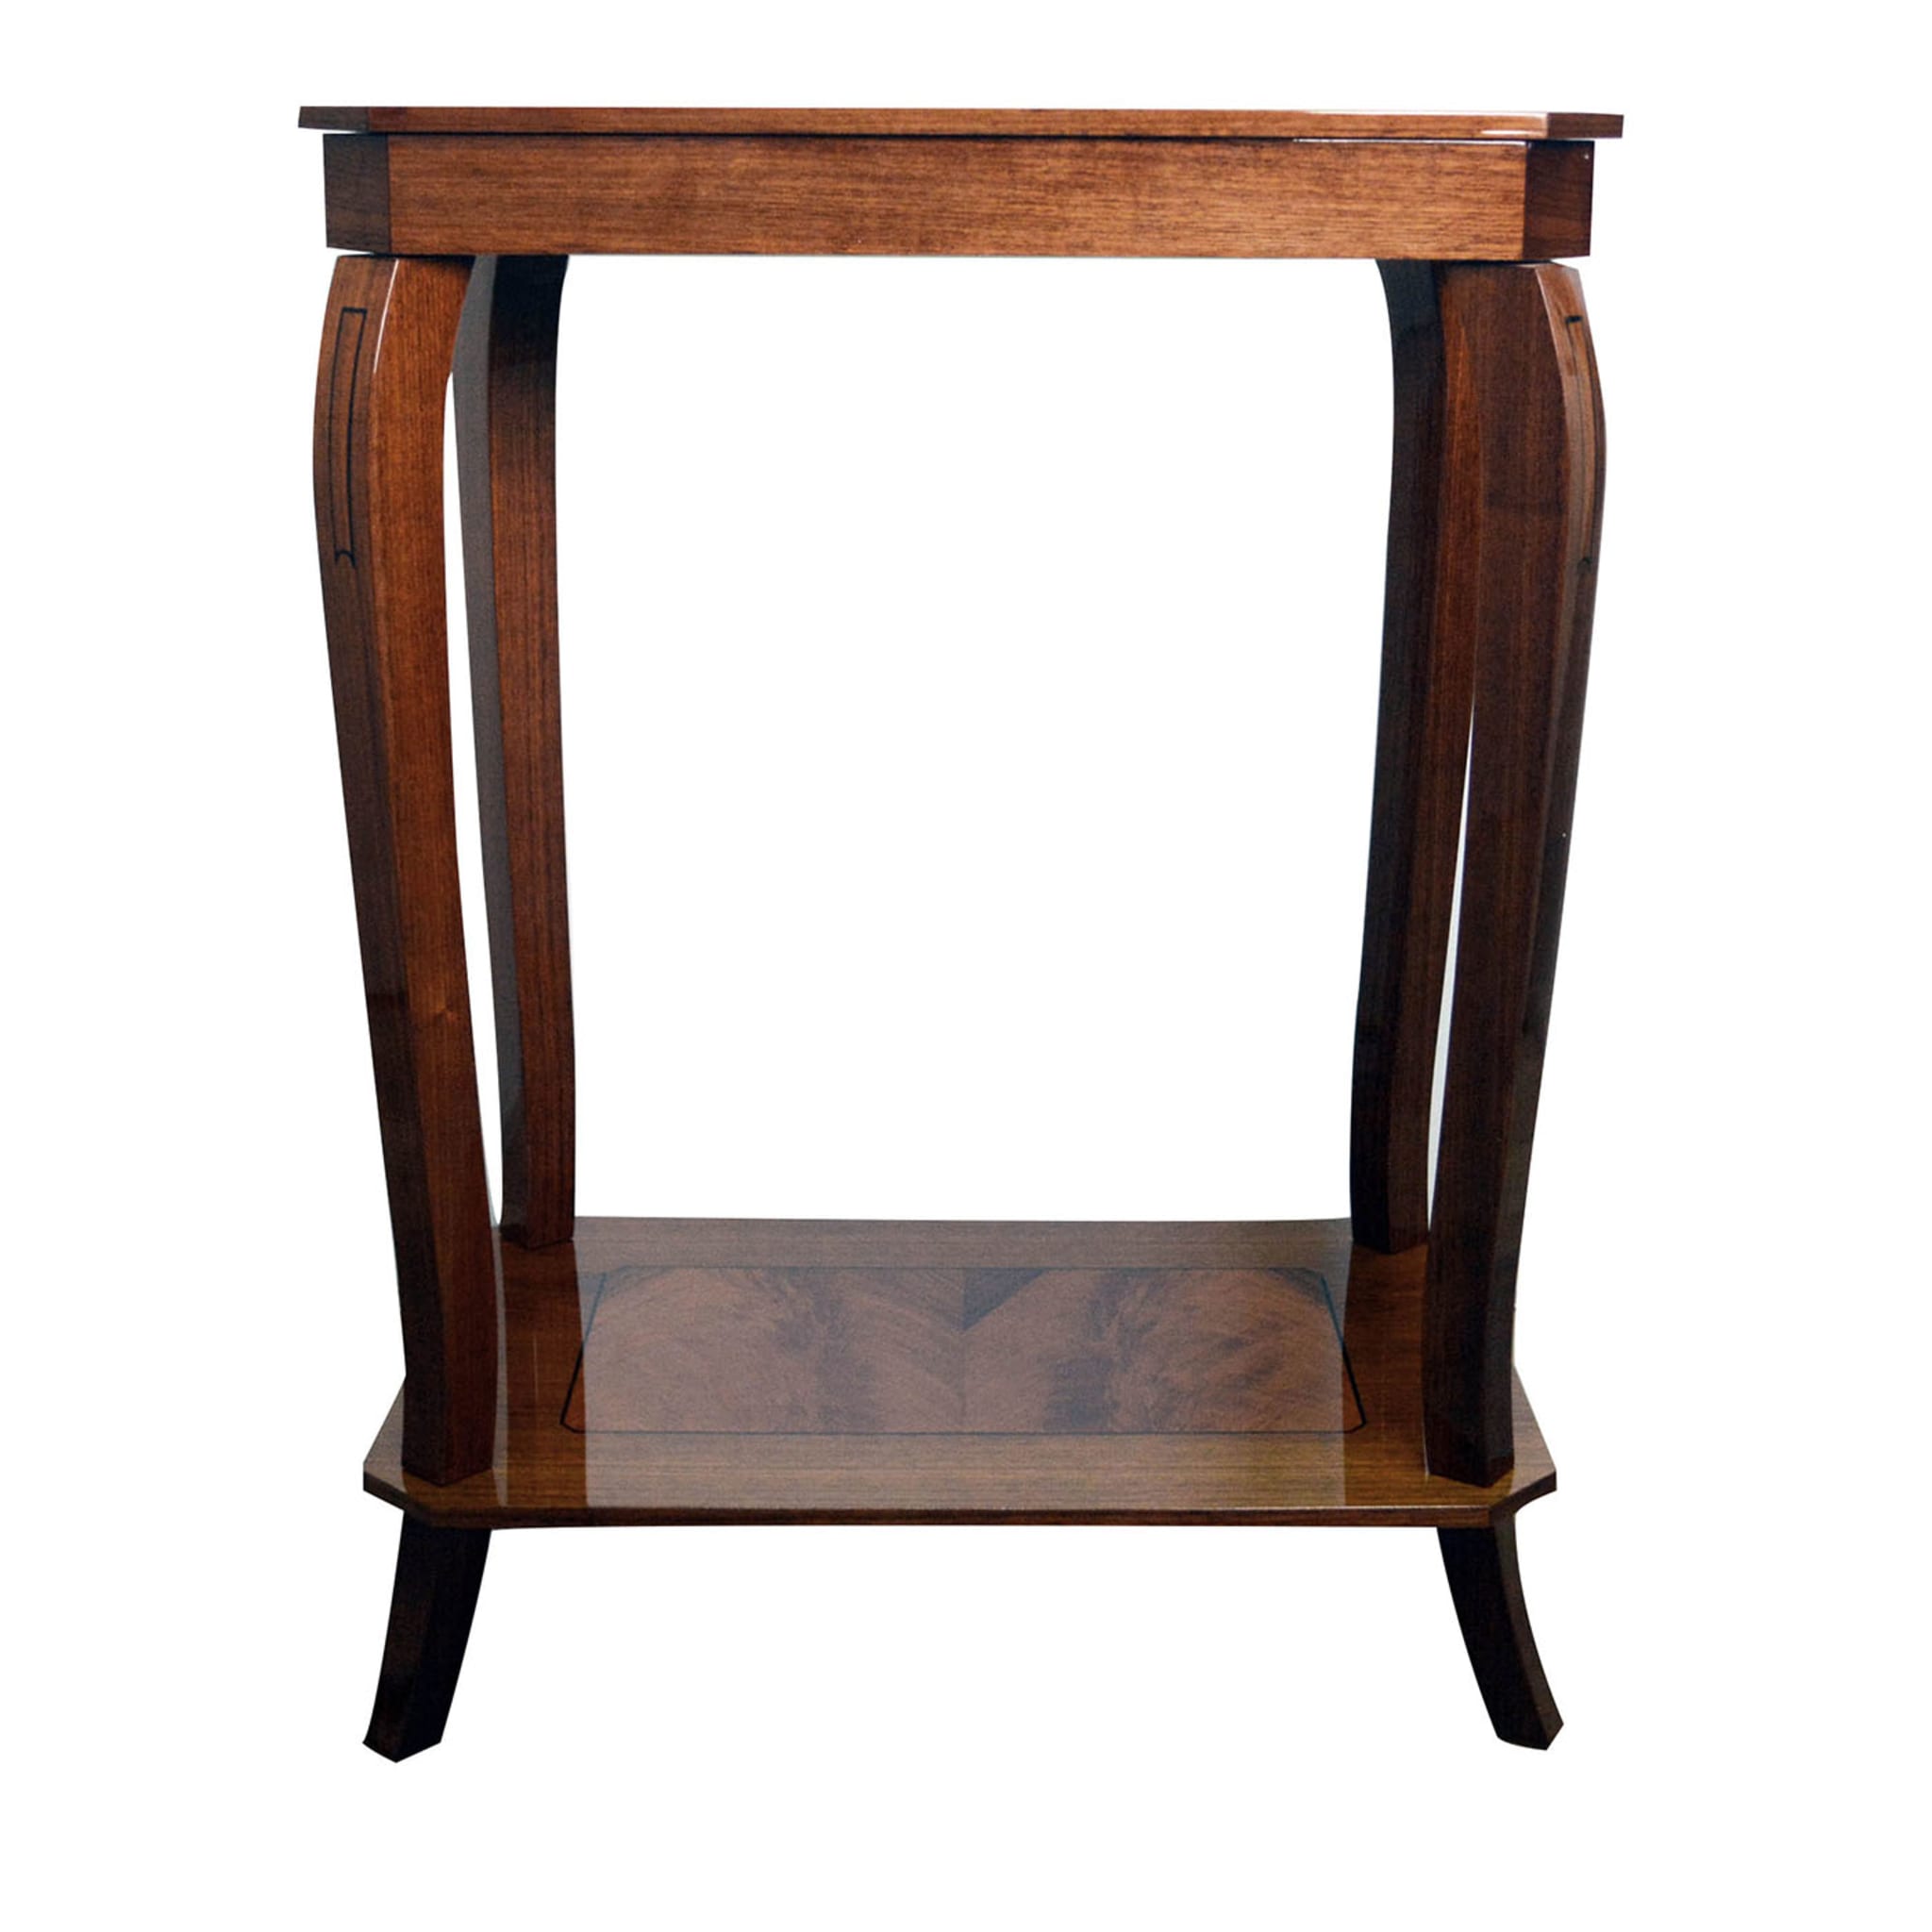 Musical Walnut Side Table with Storage Unit - Main view